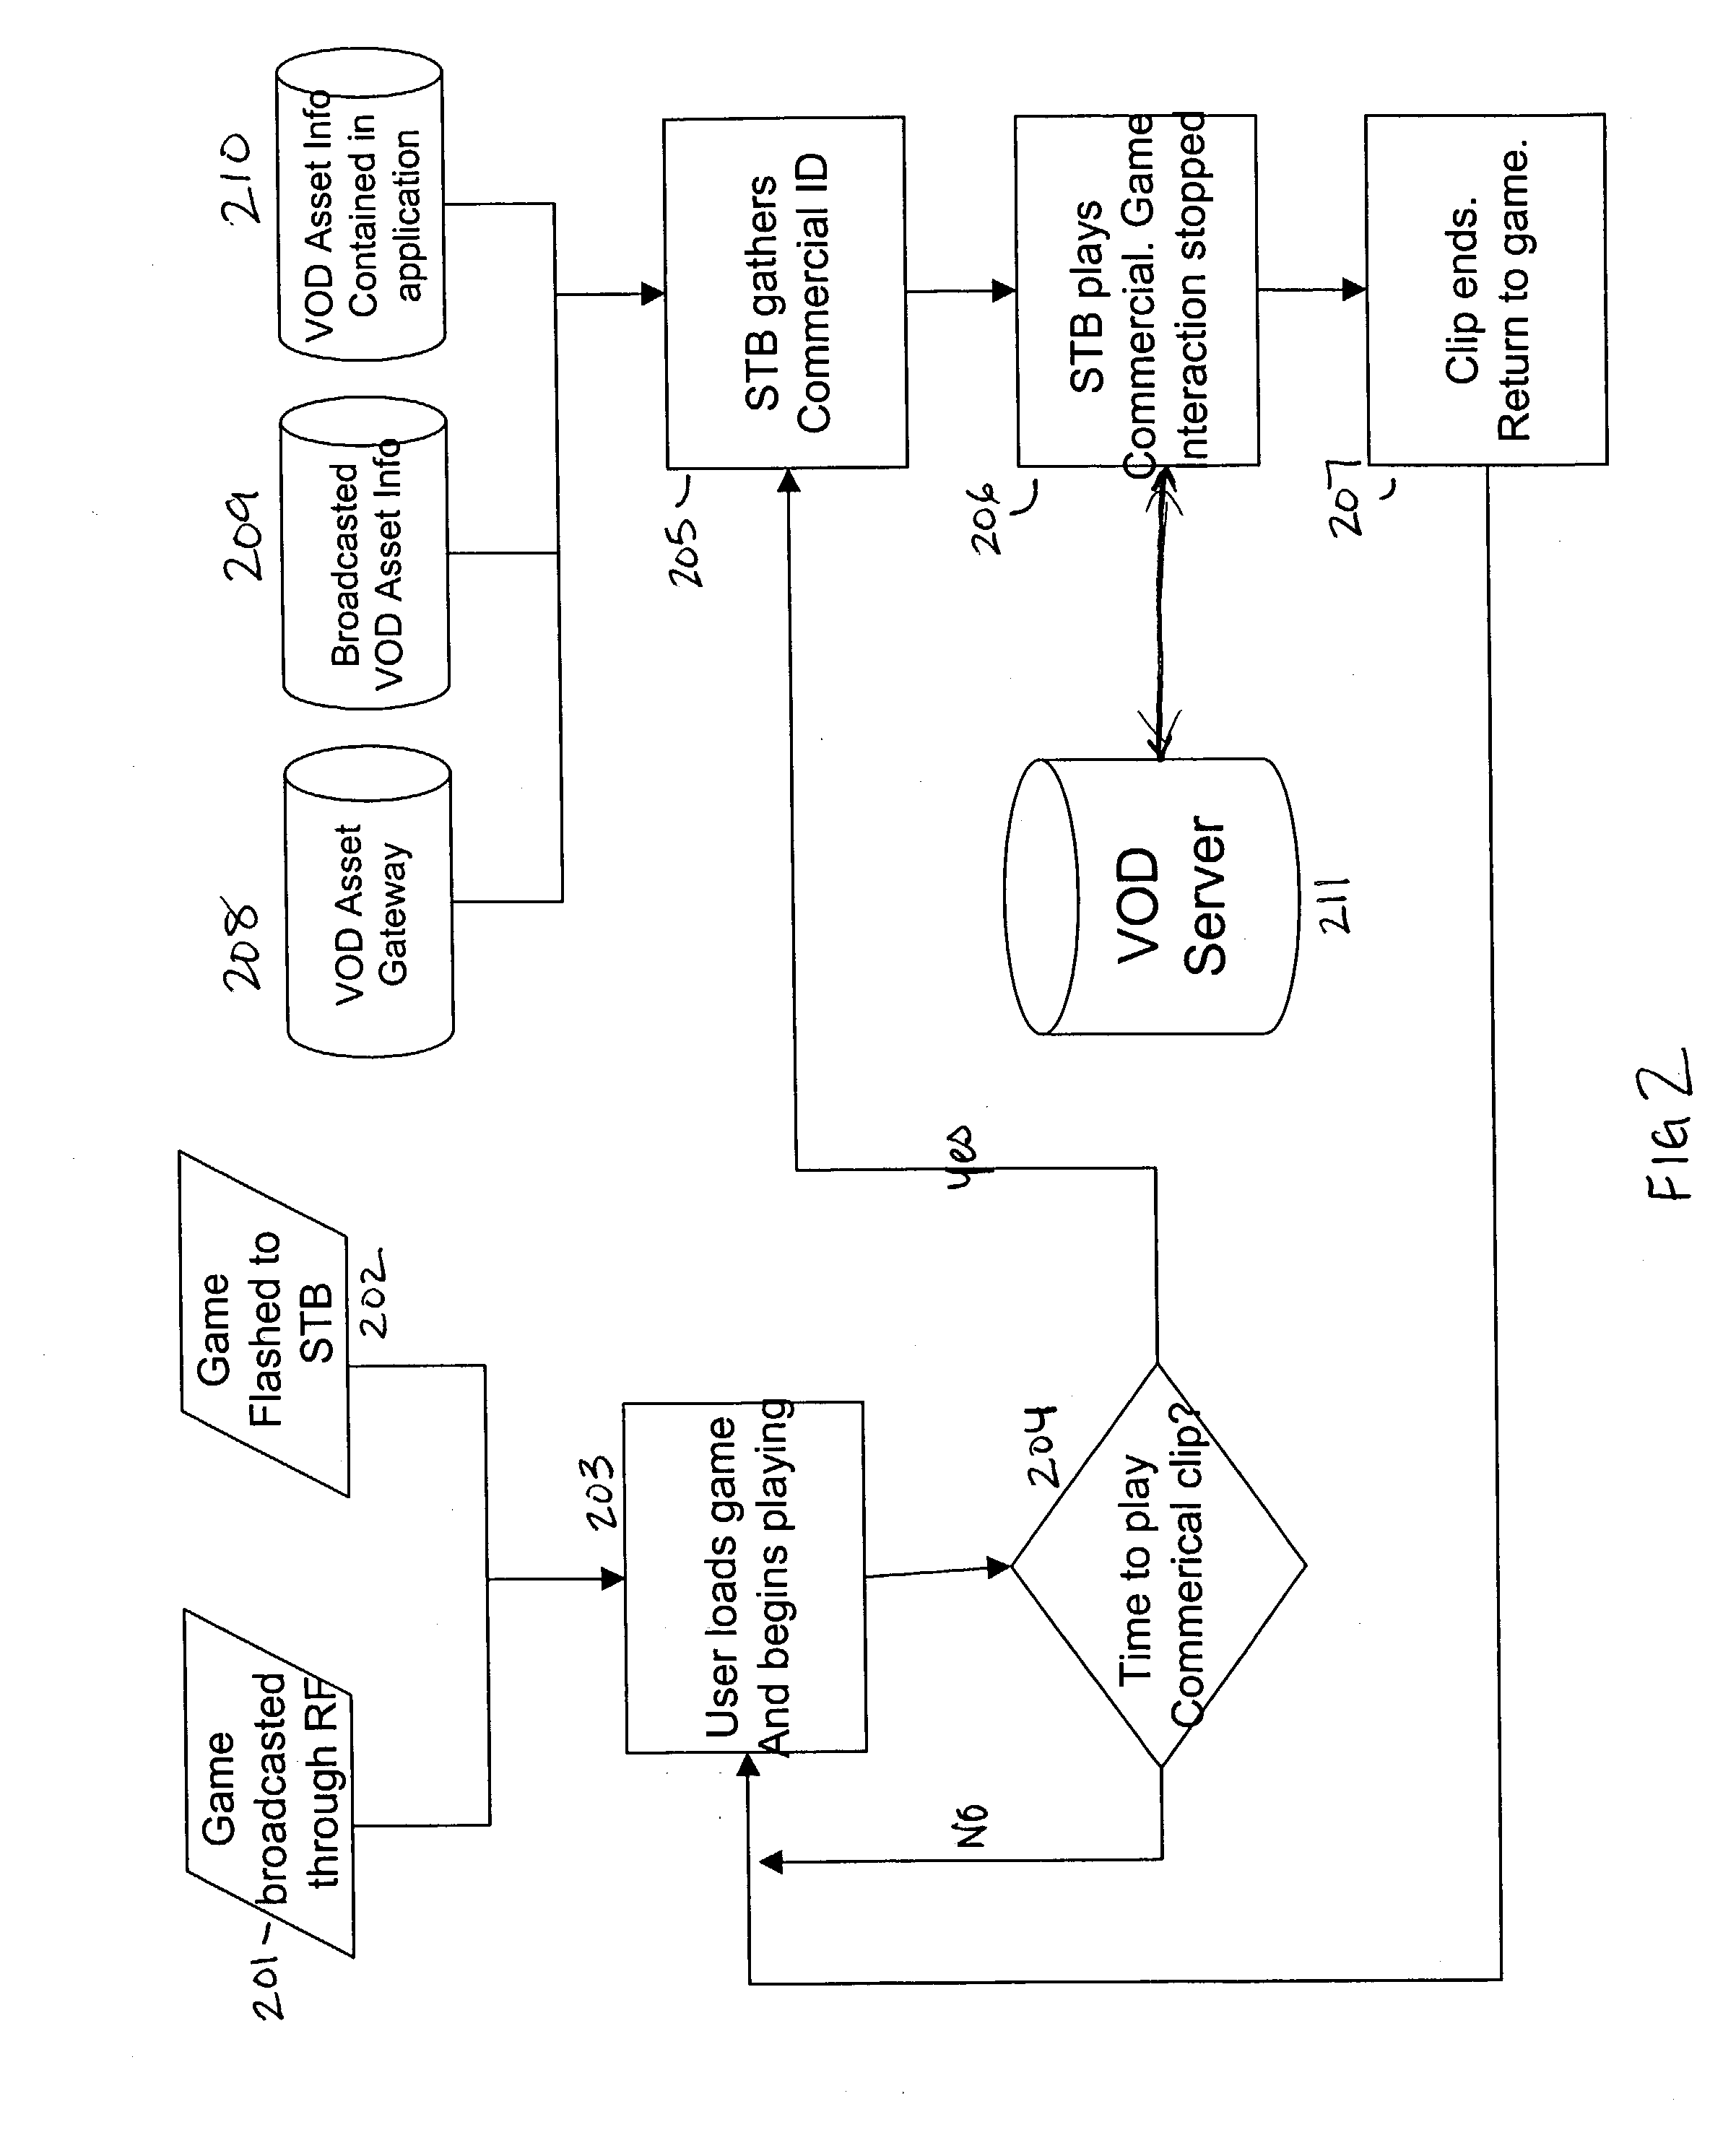 System and method for displaying commercials in connection with an interactive television application